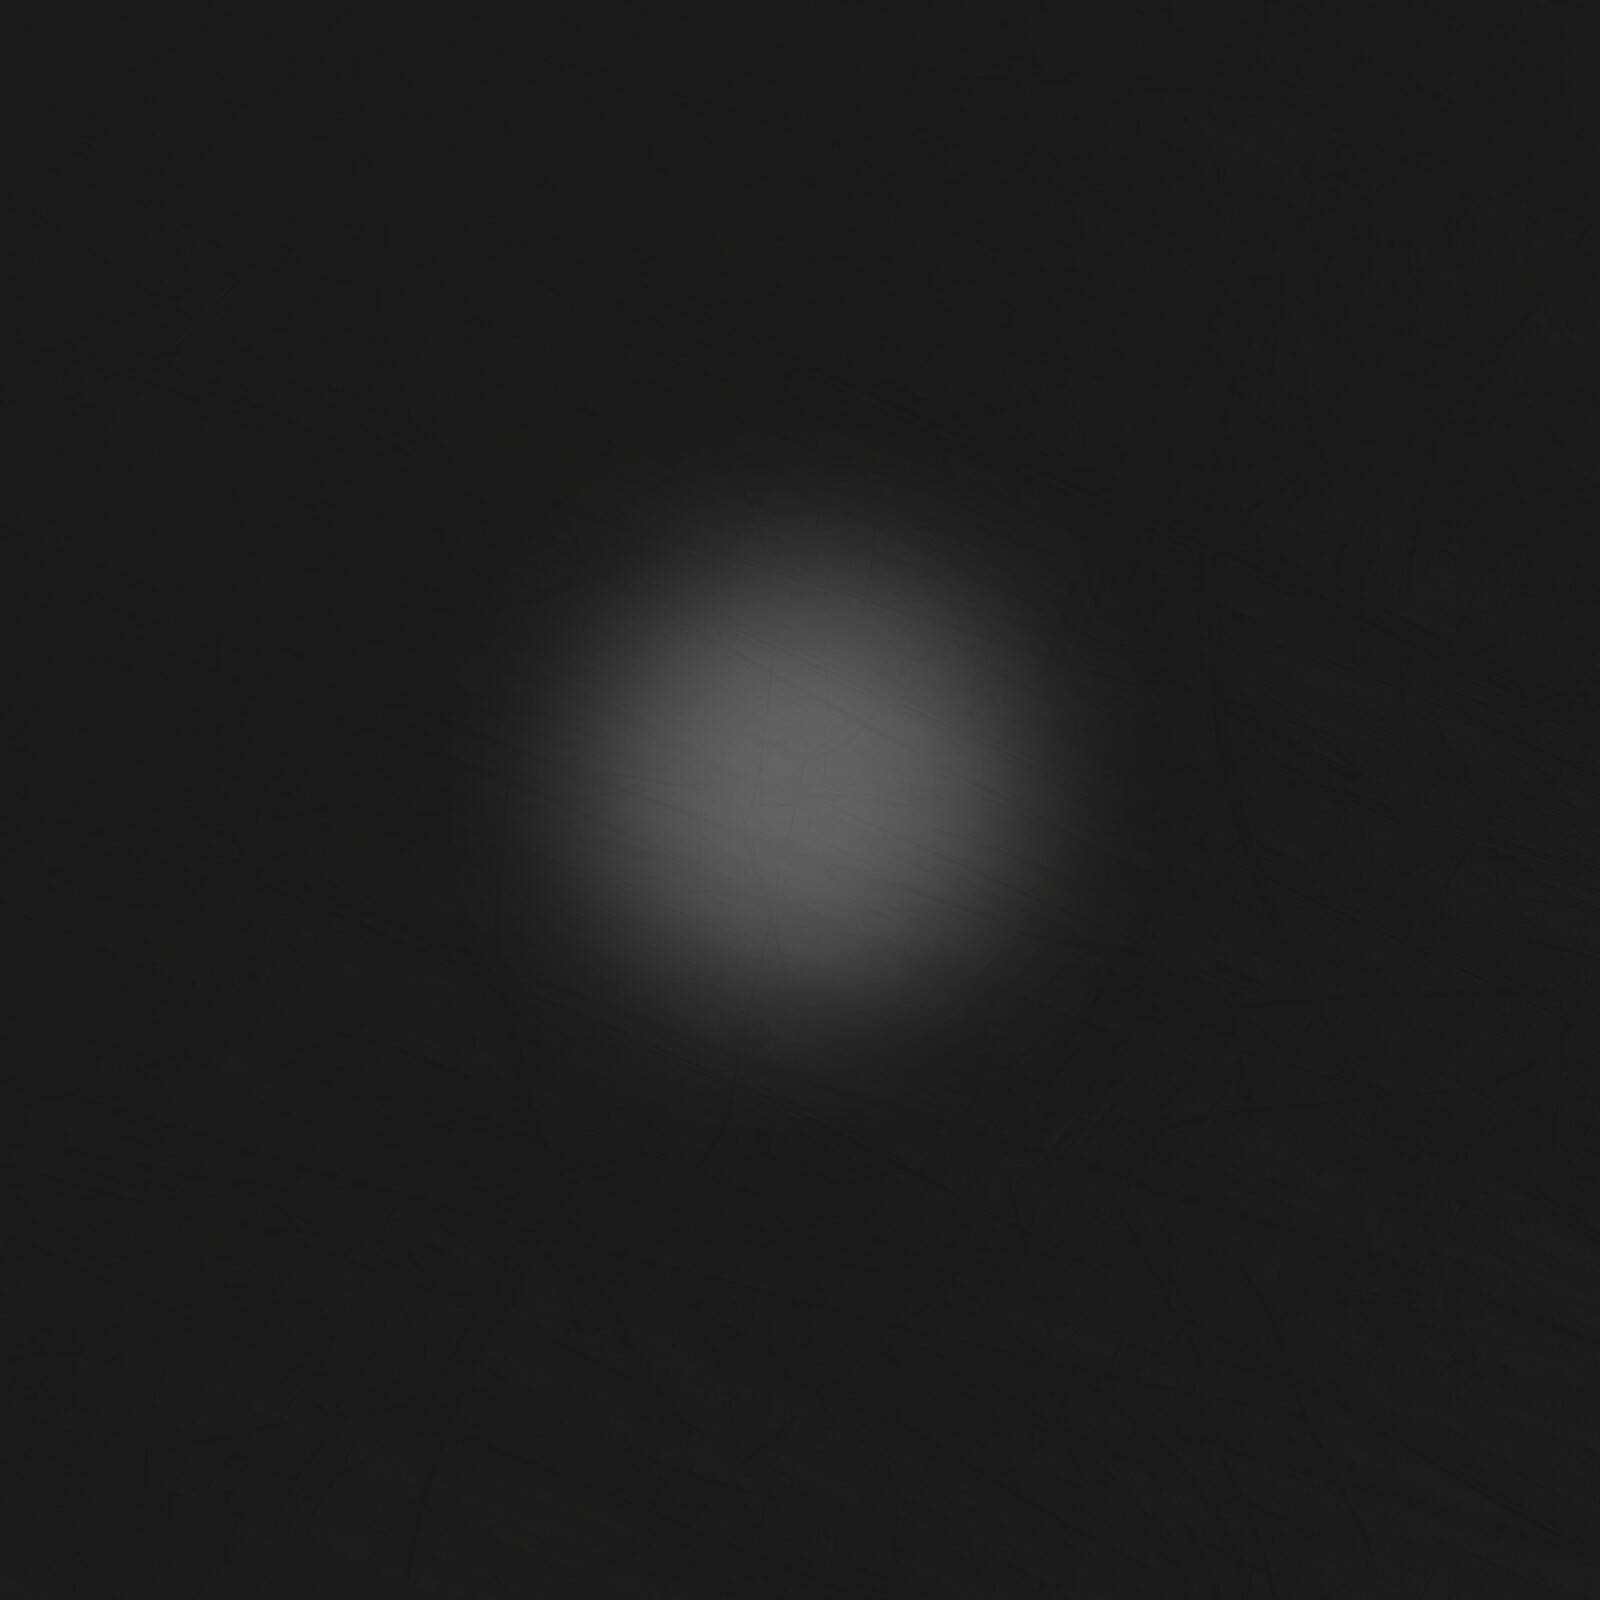 A blurred gray circle on a dark background.